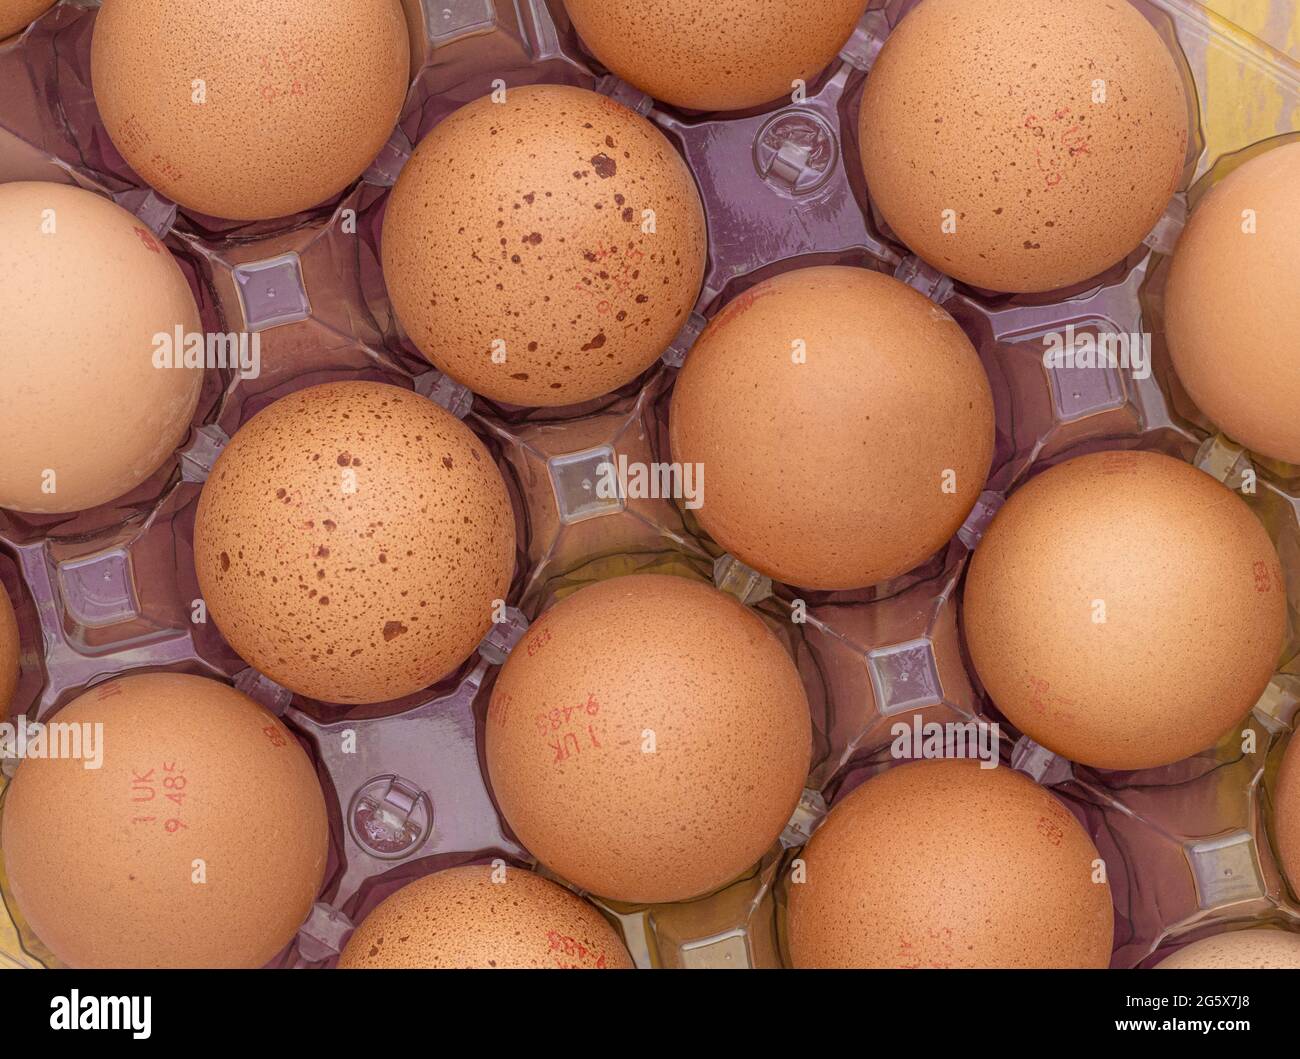 Plan view of brown eggs in a clear plastic carton on a pink and yellow wooden background. Stock Photo